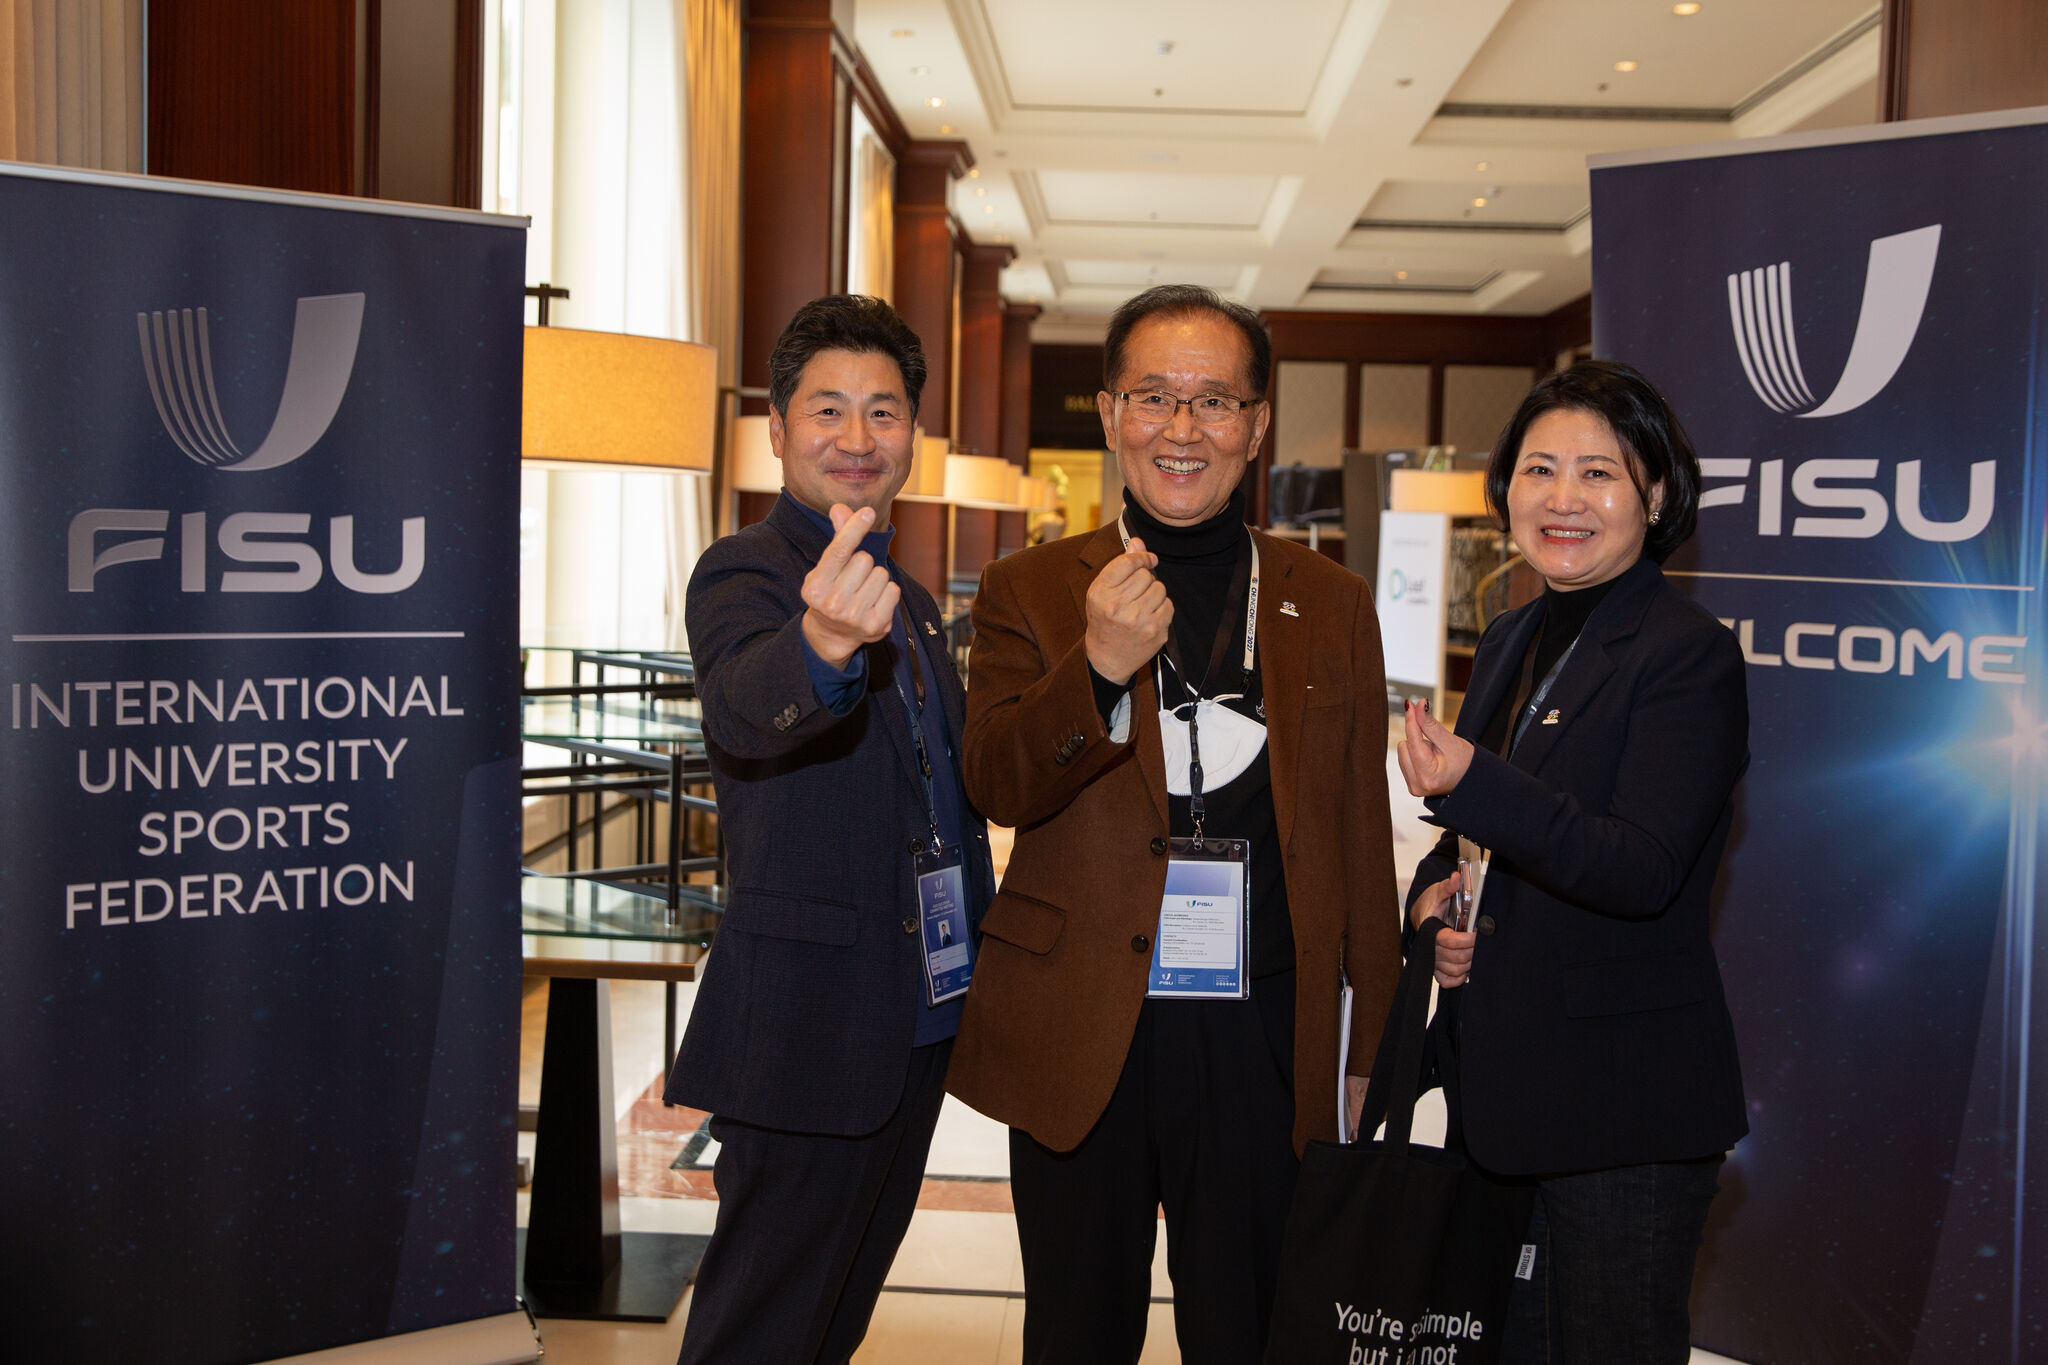 Chungcheong 2027 secretary general Kim Yoon-suk, centre, said he was "thrilled" about the decision ©FISU